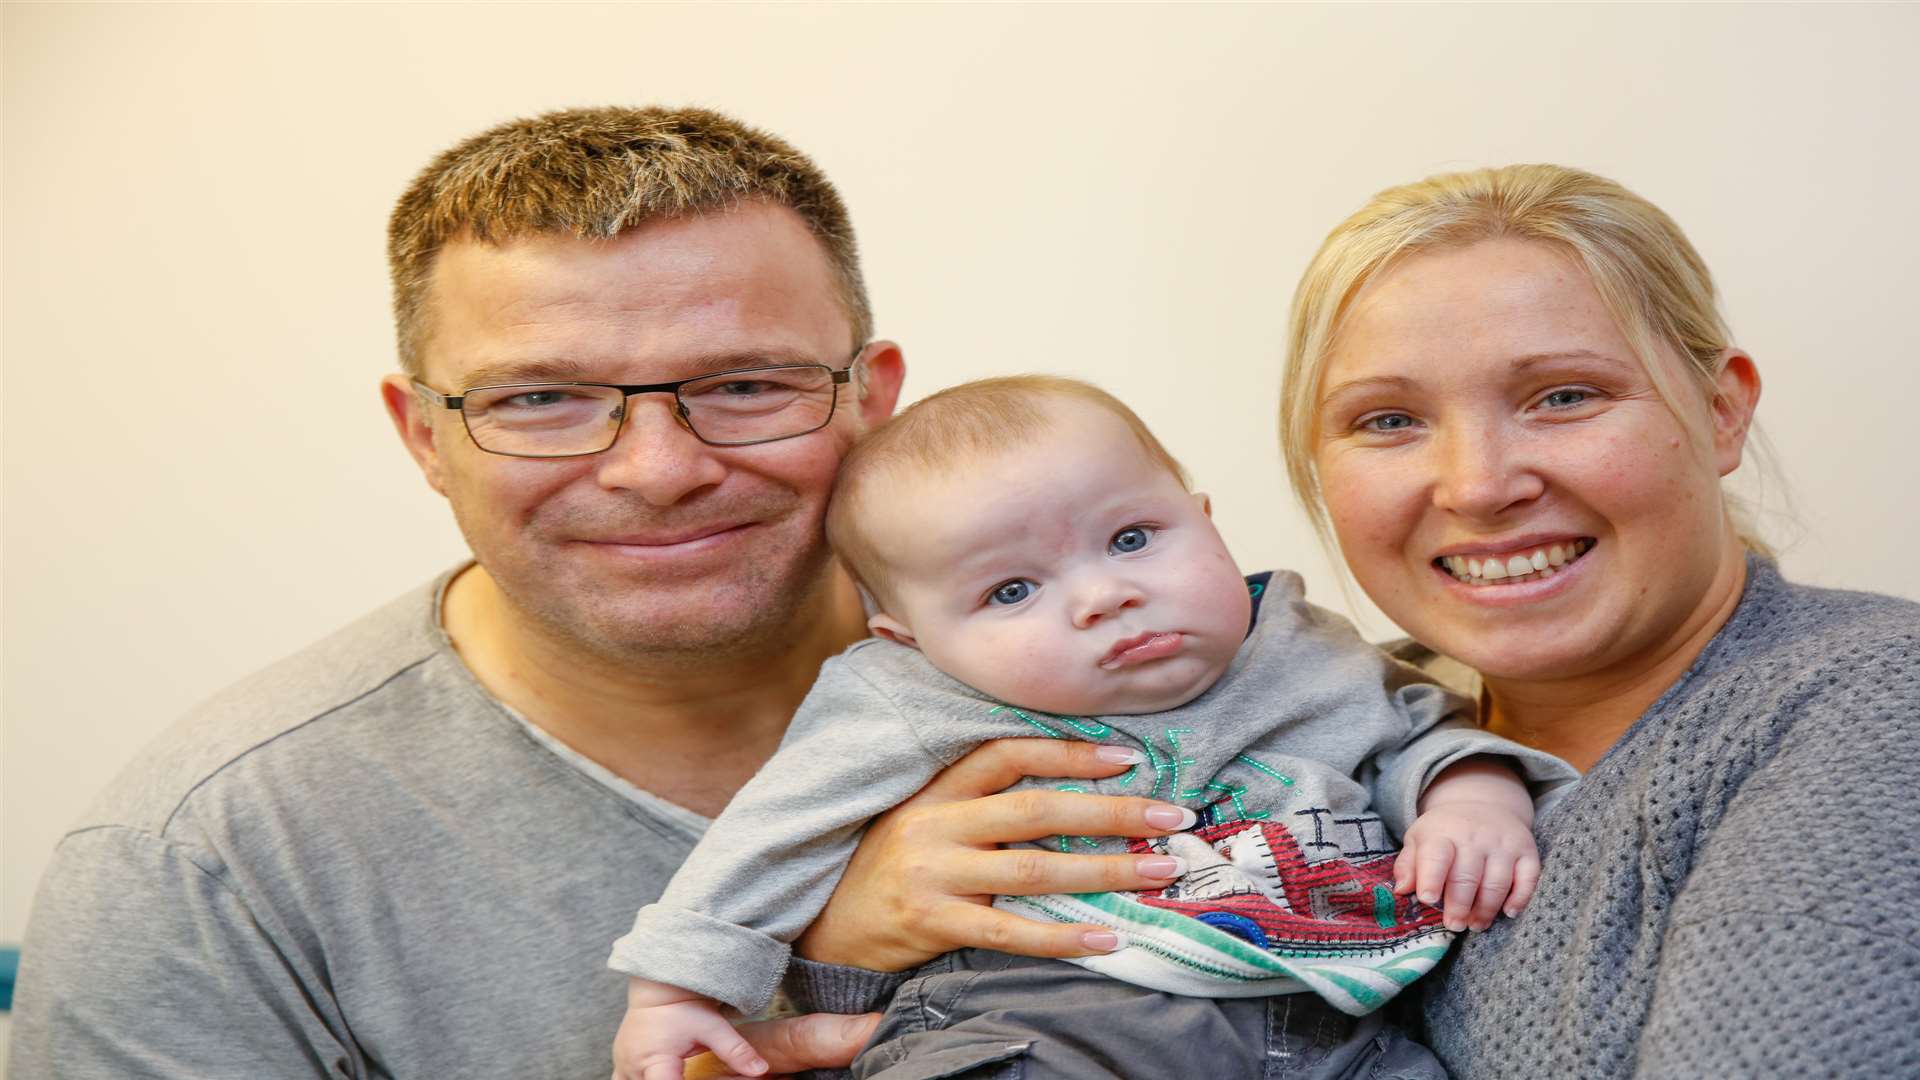 Adrian Pettit and Alison Smith with baby Jensen who suffered a severe reaction after taking a ibuprofen medicine